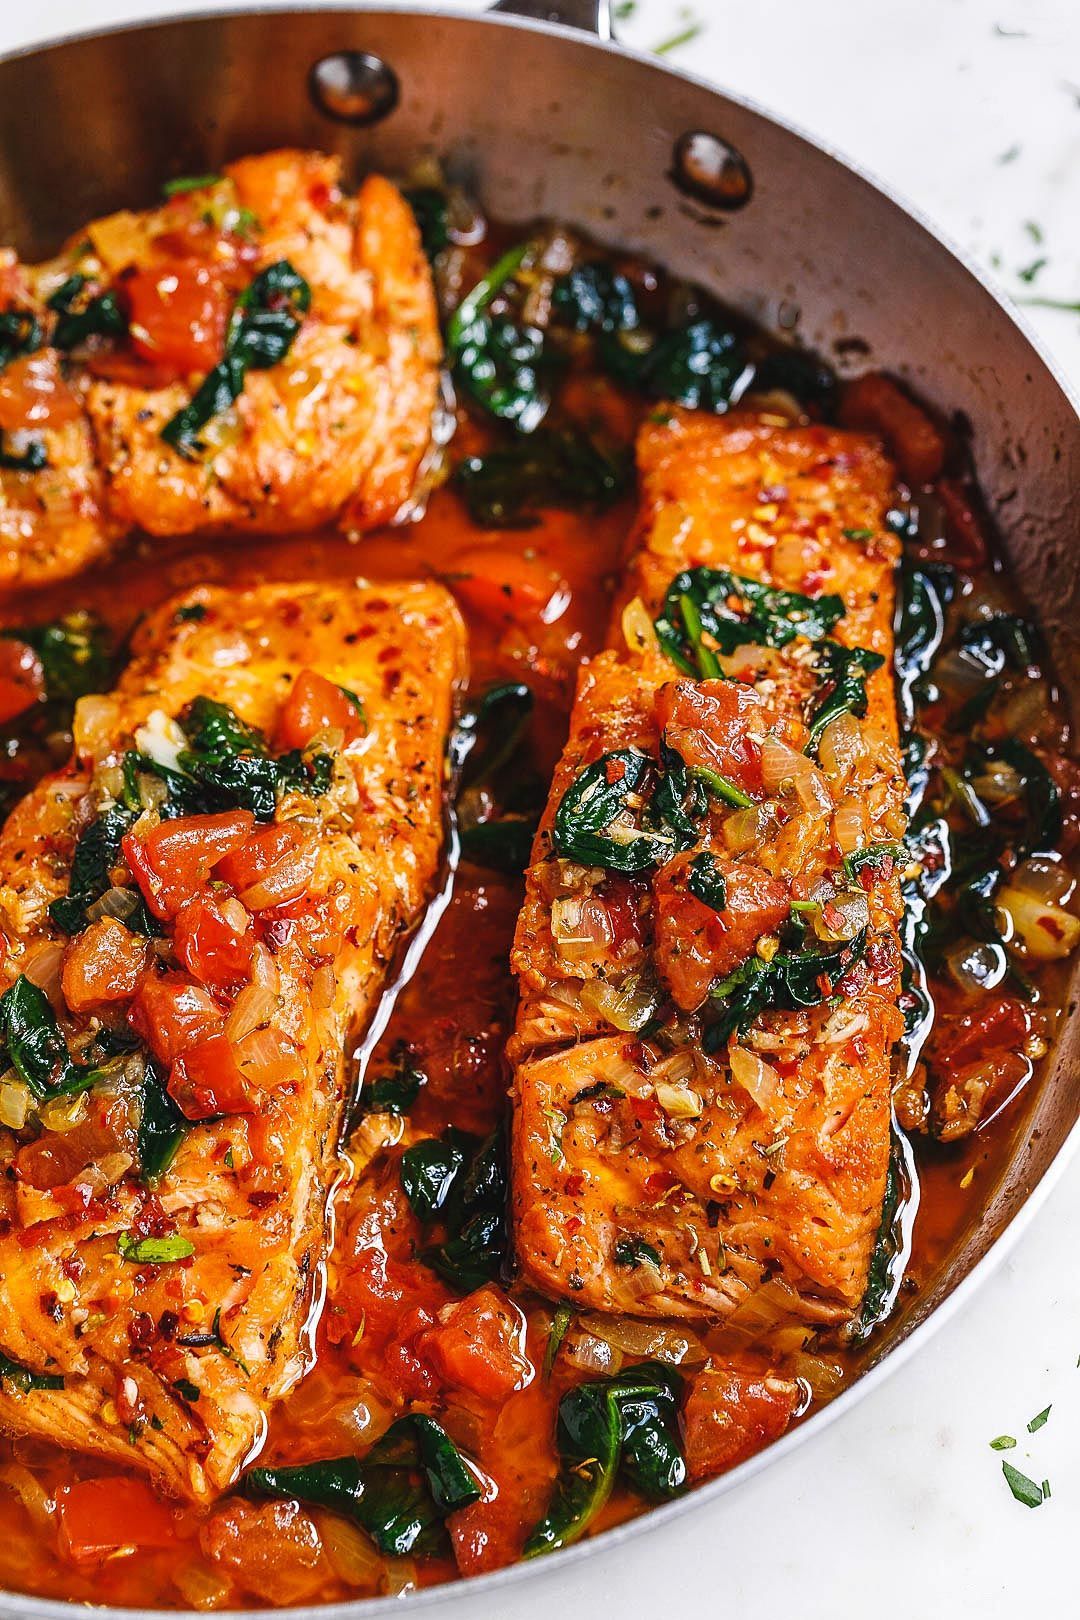 Tuscan Garlic Butter Salmon Skillet with Spinach and Tomato -   13 healthy recipes Salmon garlic butter ideas